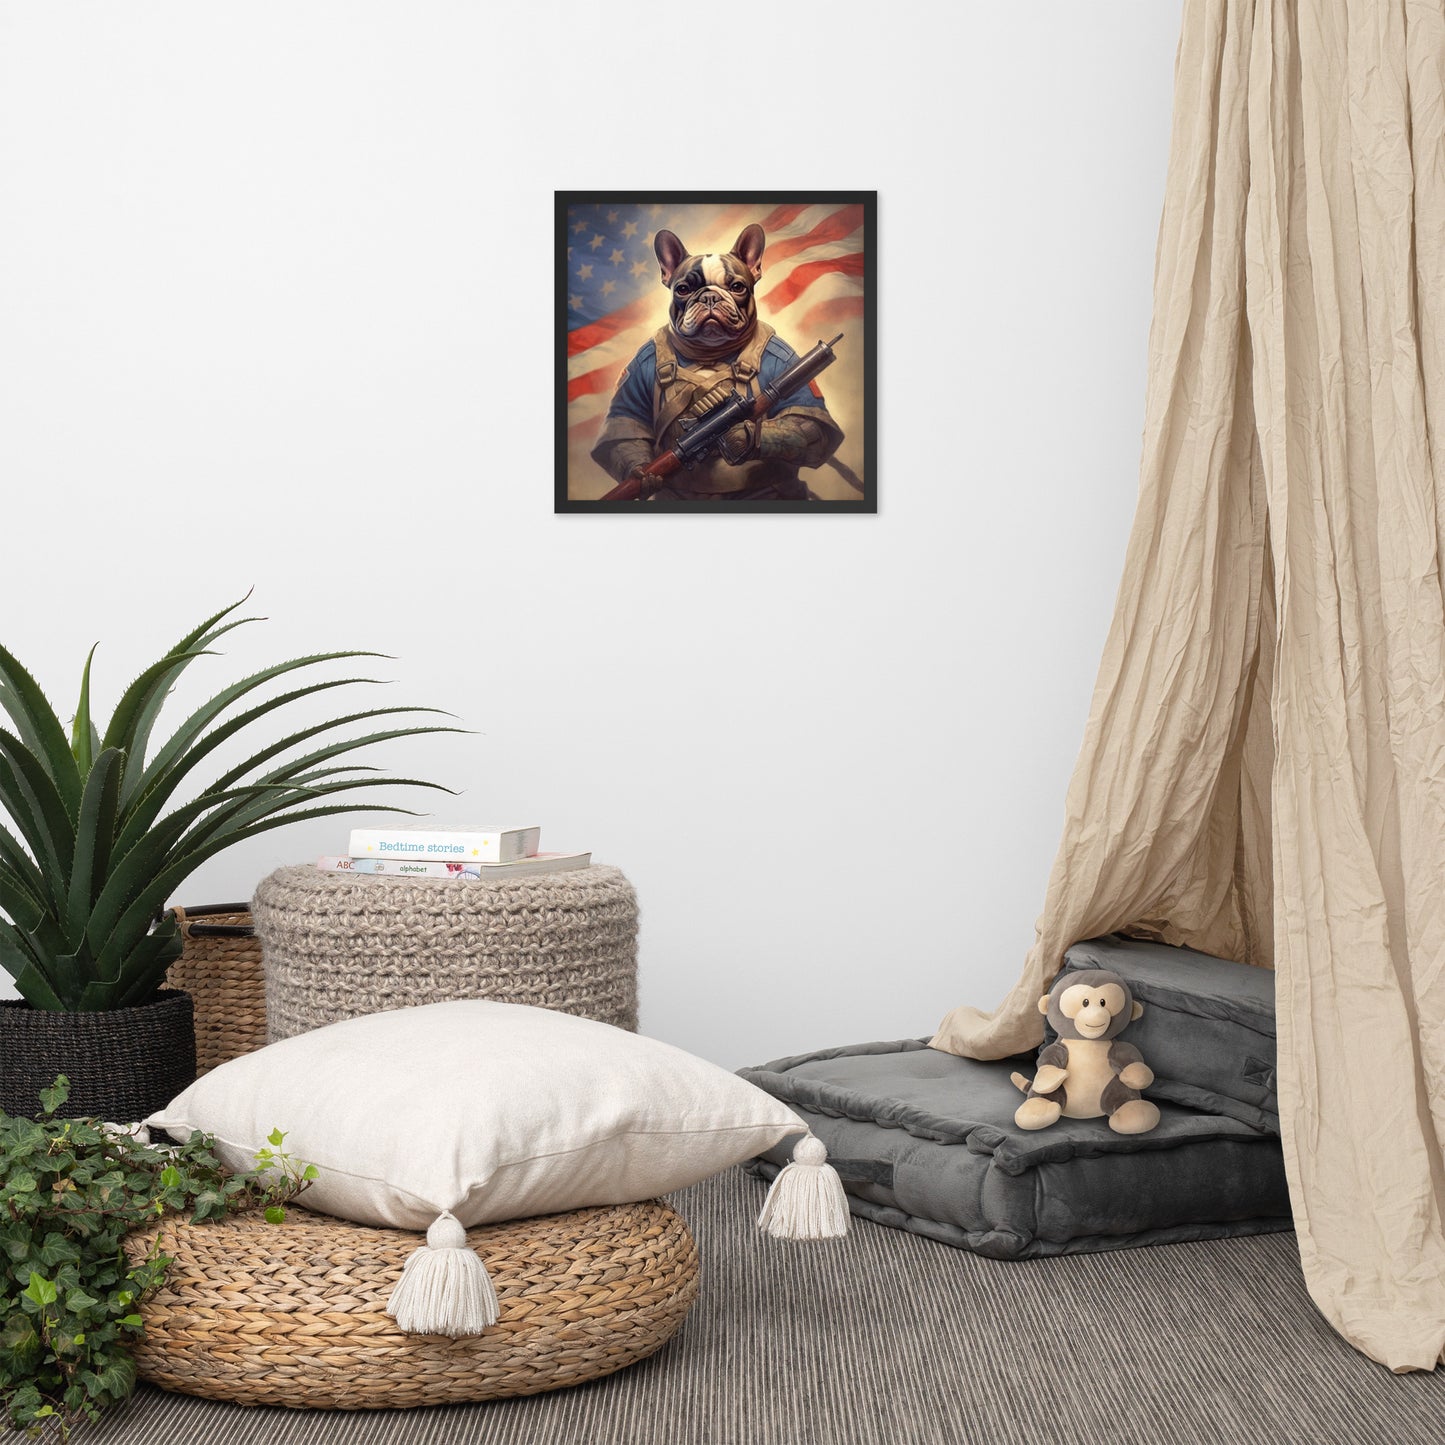 Soldier Frenchie Framed Poster - A Bravery and Artistic Choice for Pet Lovers and Country Force Admirers